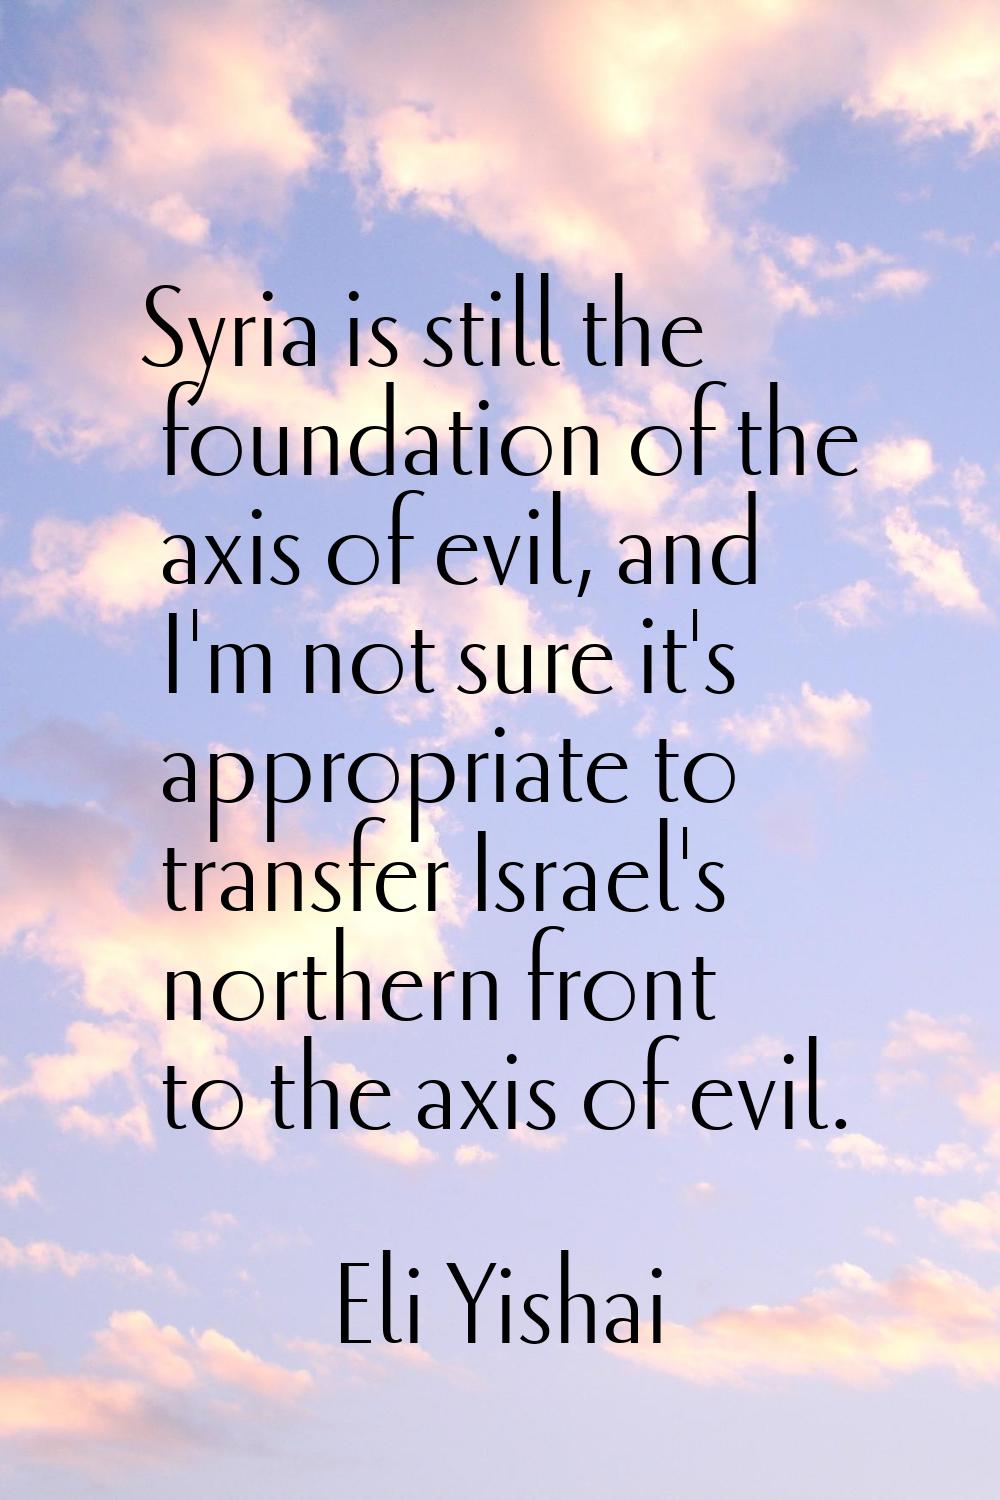 Syria is still the foundation of the axis of evil, and I'm not sure it's appropriate to transfer Is